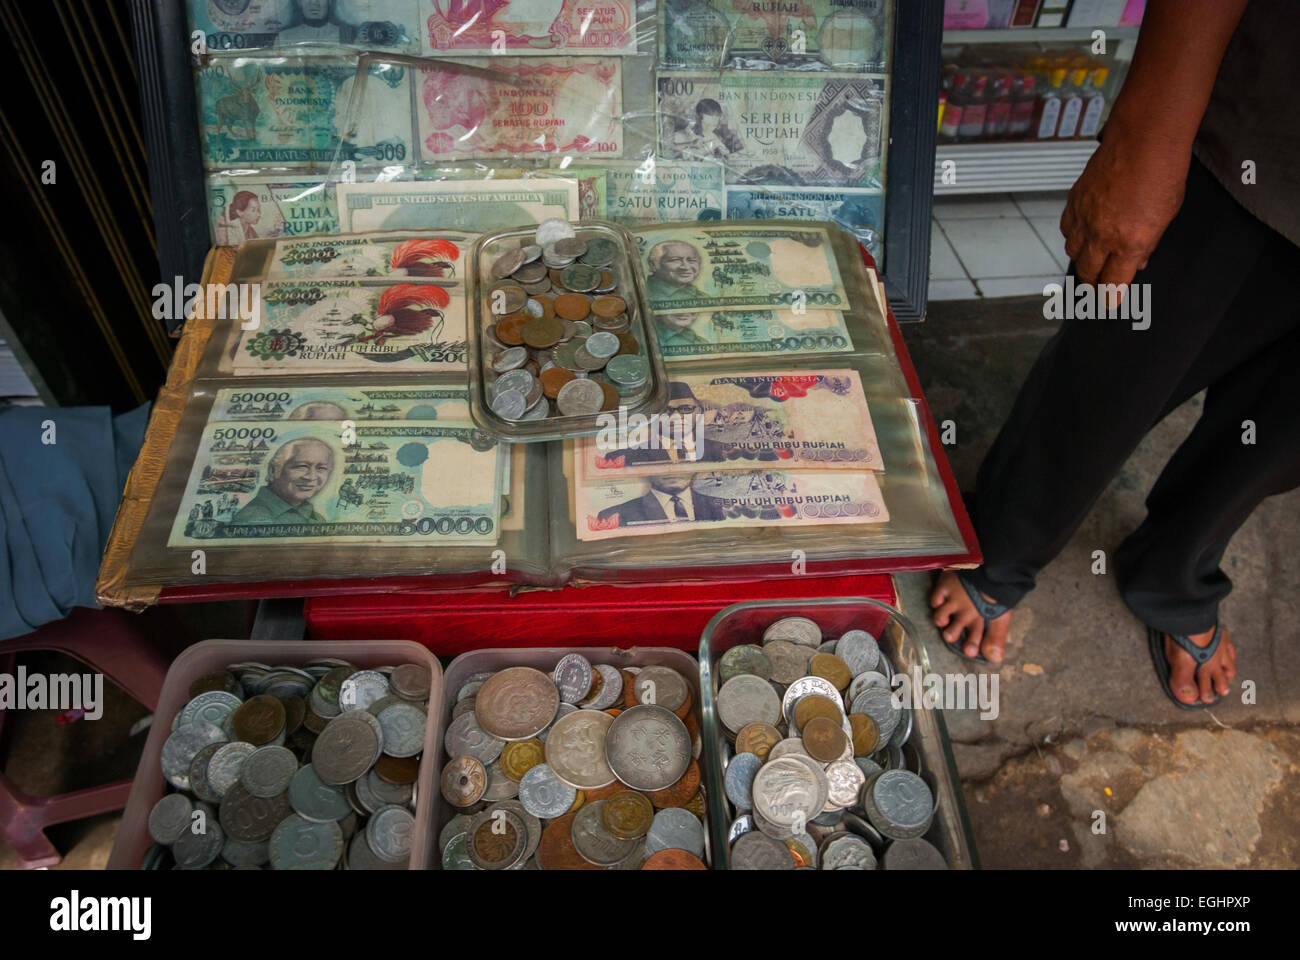 Old (withdrawn, expired) Indonesian banknotes are being sold as collector items at a roadside market in Jatinegara, East Jakarta, Jakarta, Indonesia. Stock Photo